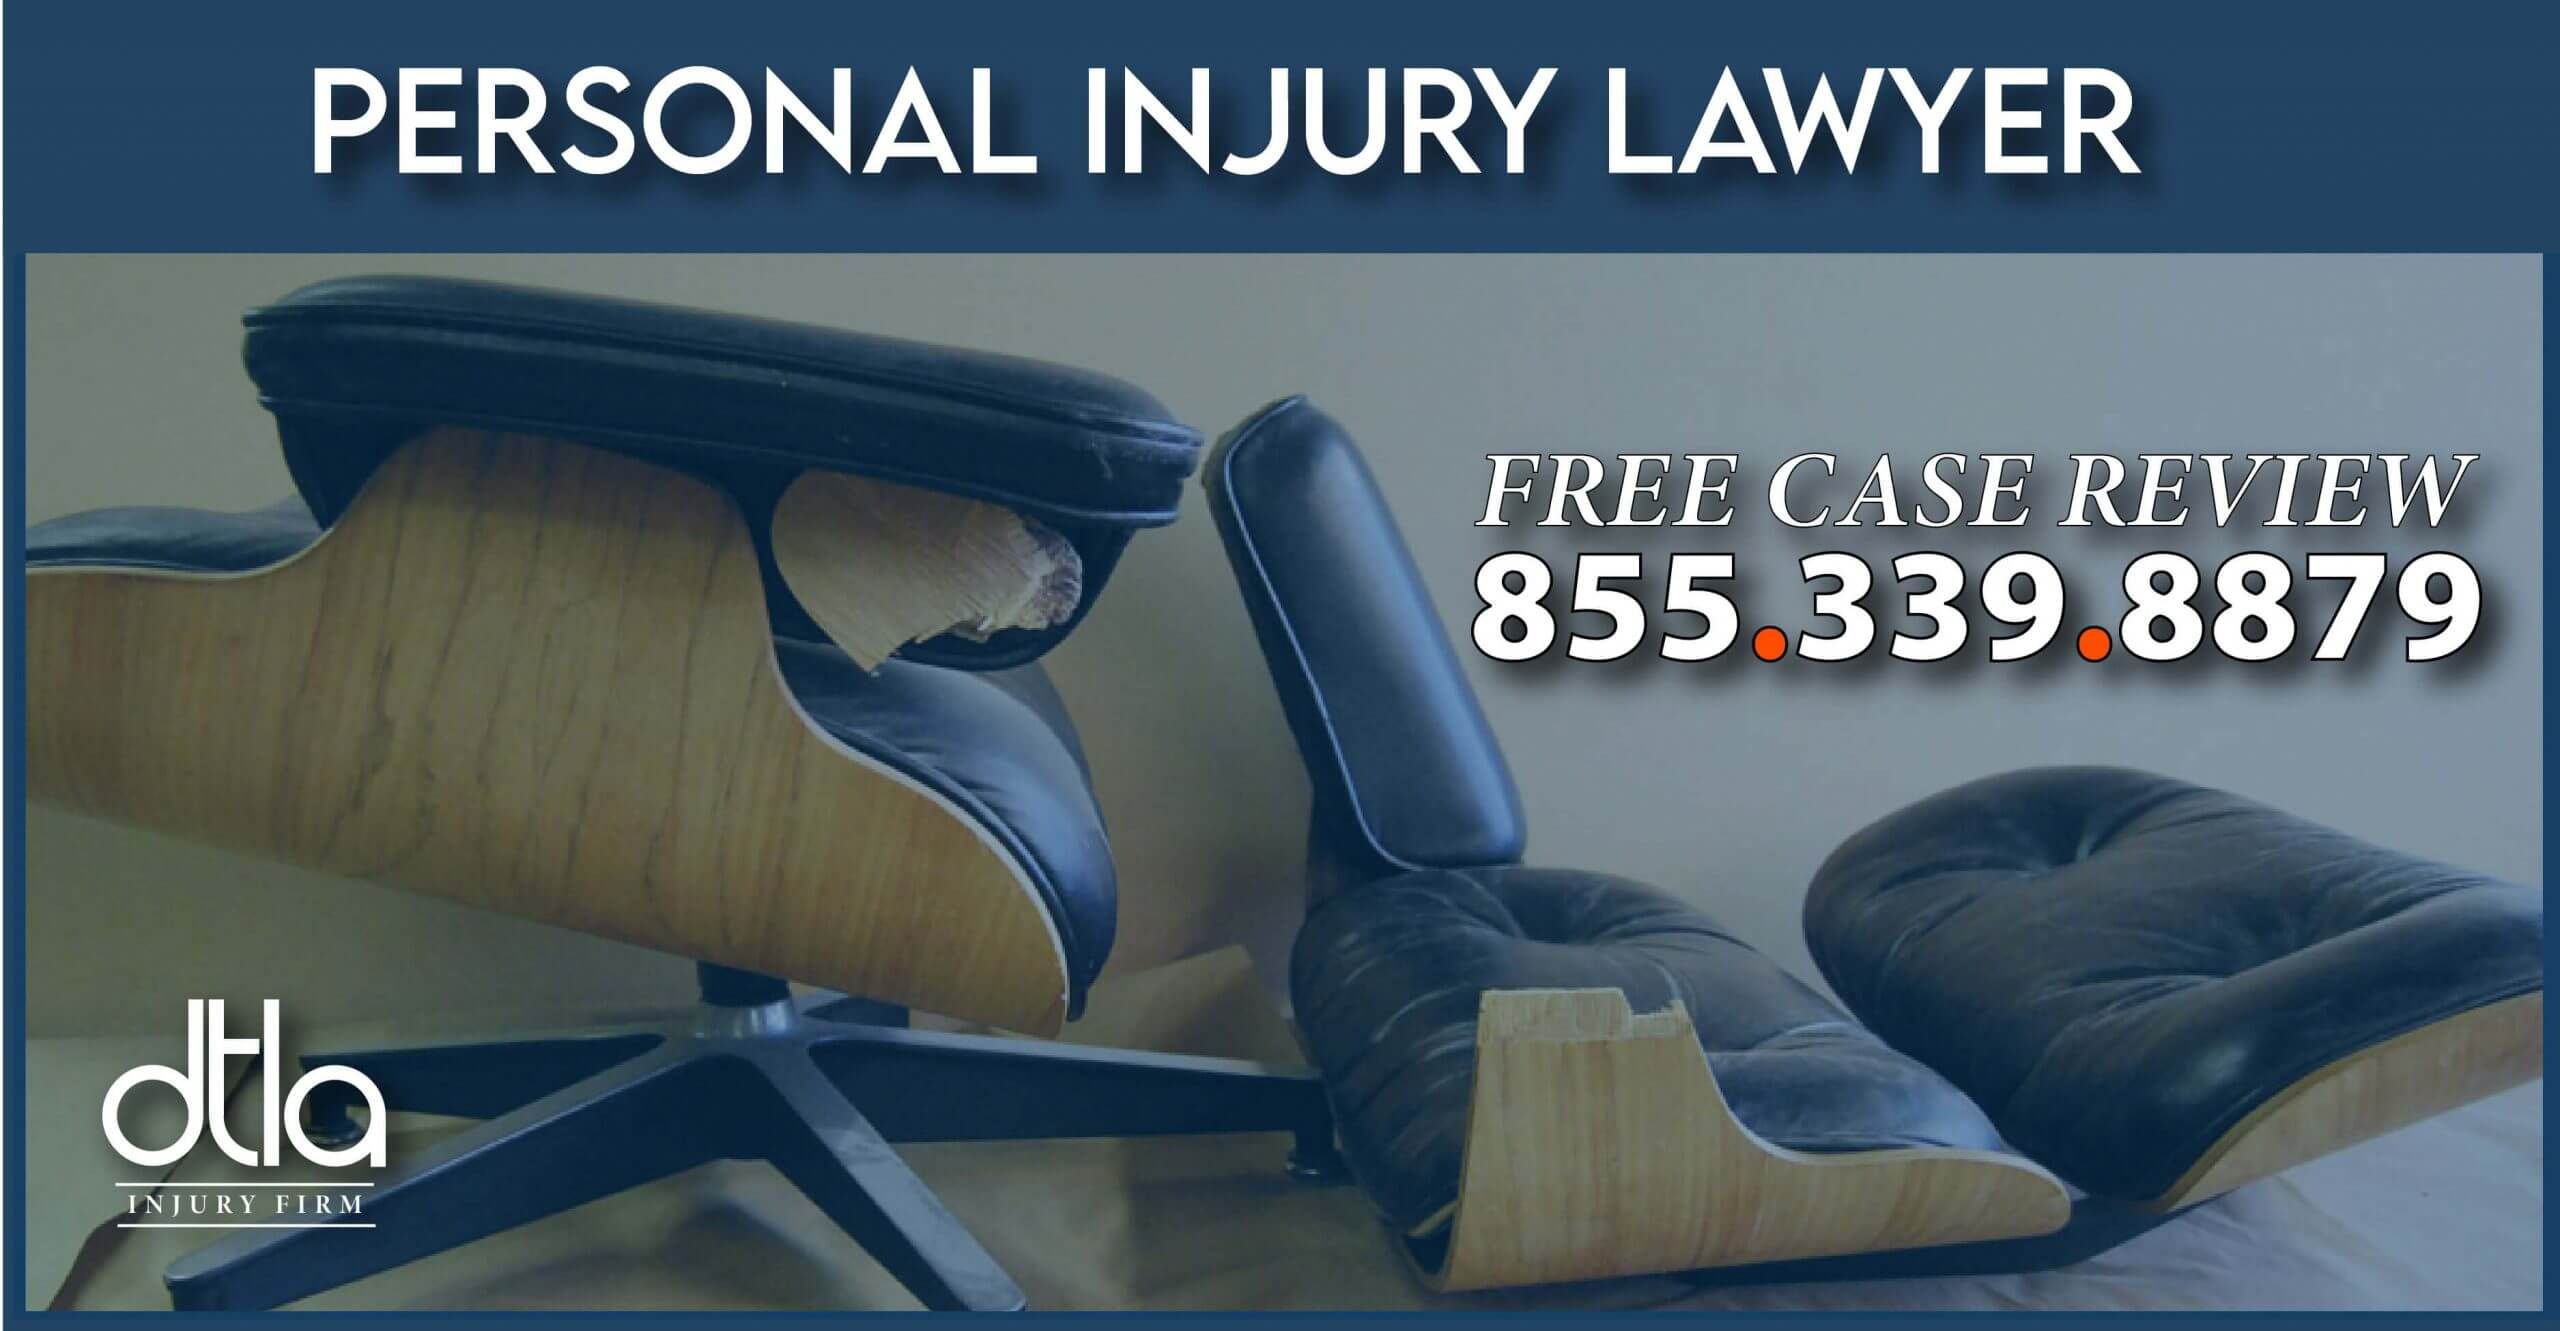 broken chair accident collapsed incident attorney personal injury compensation